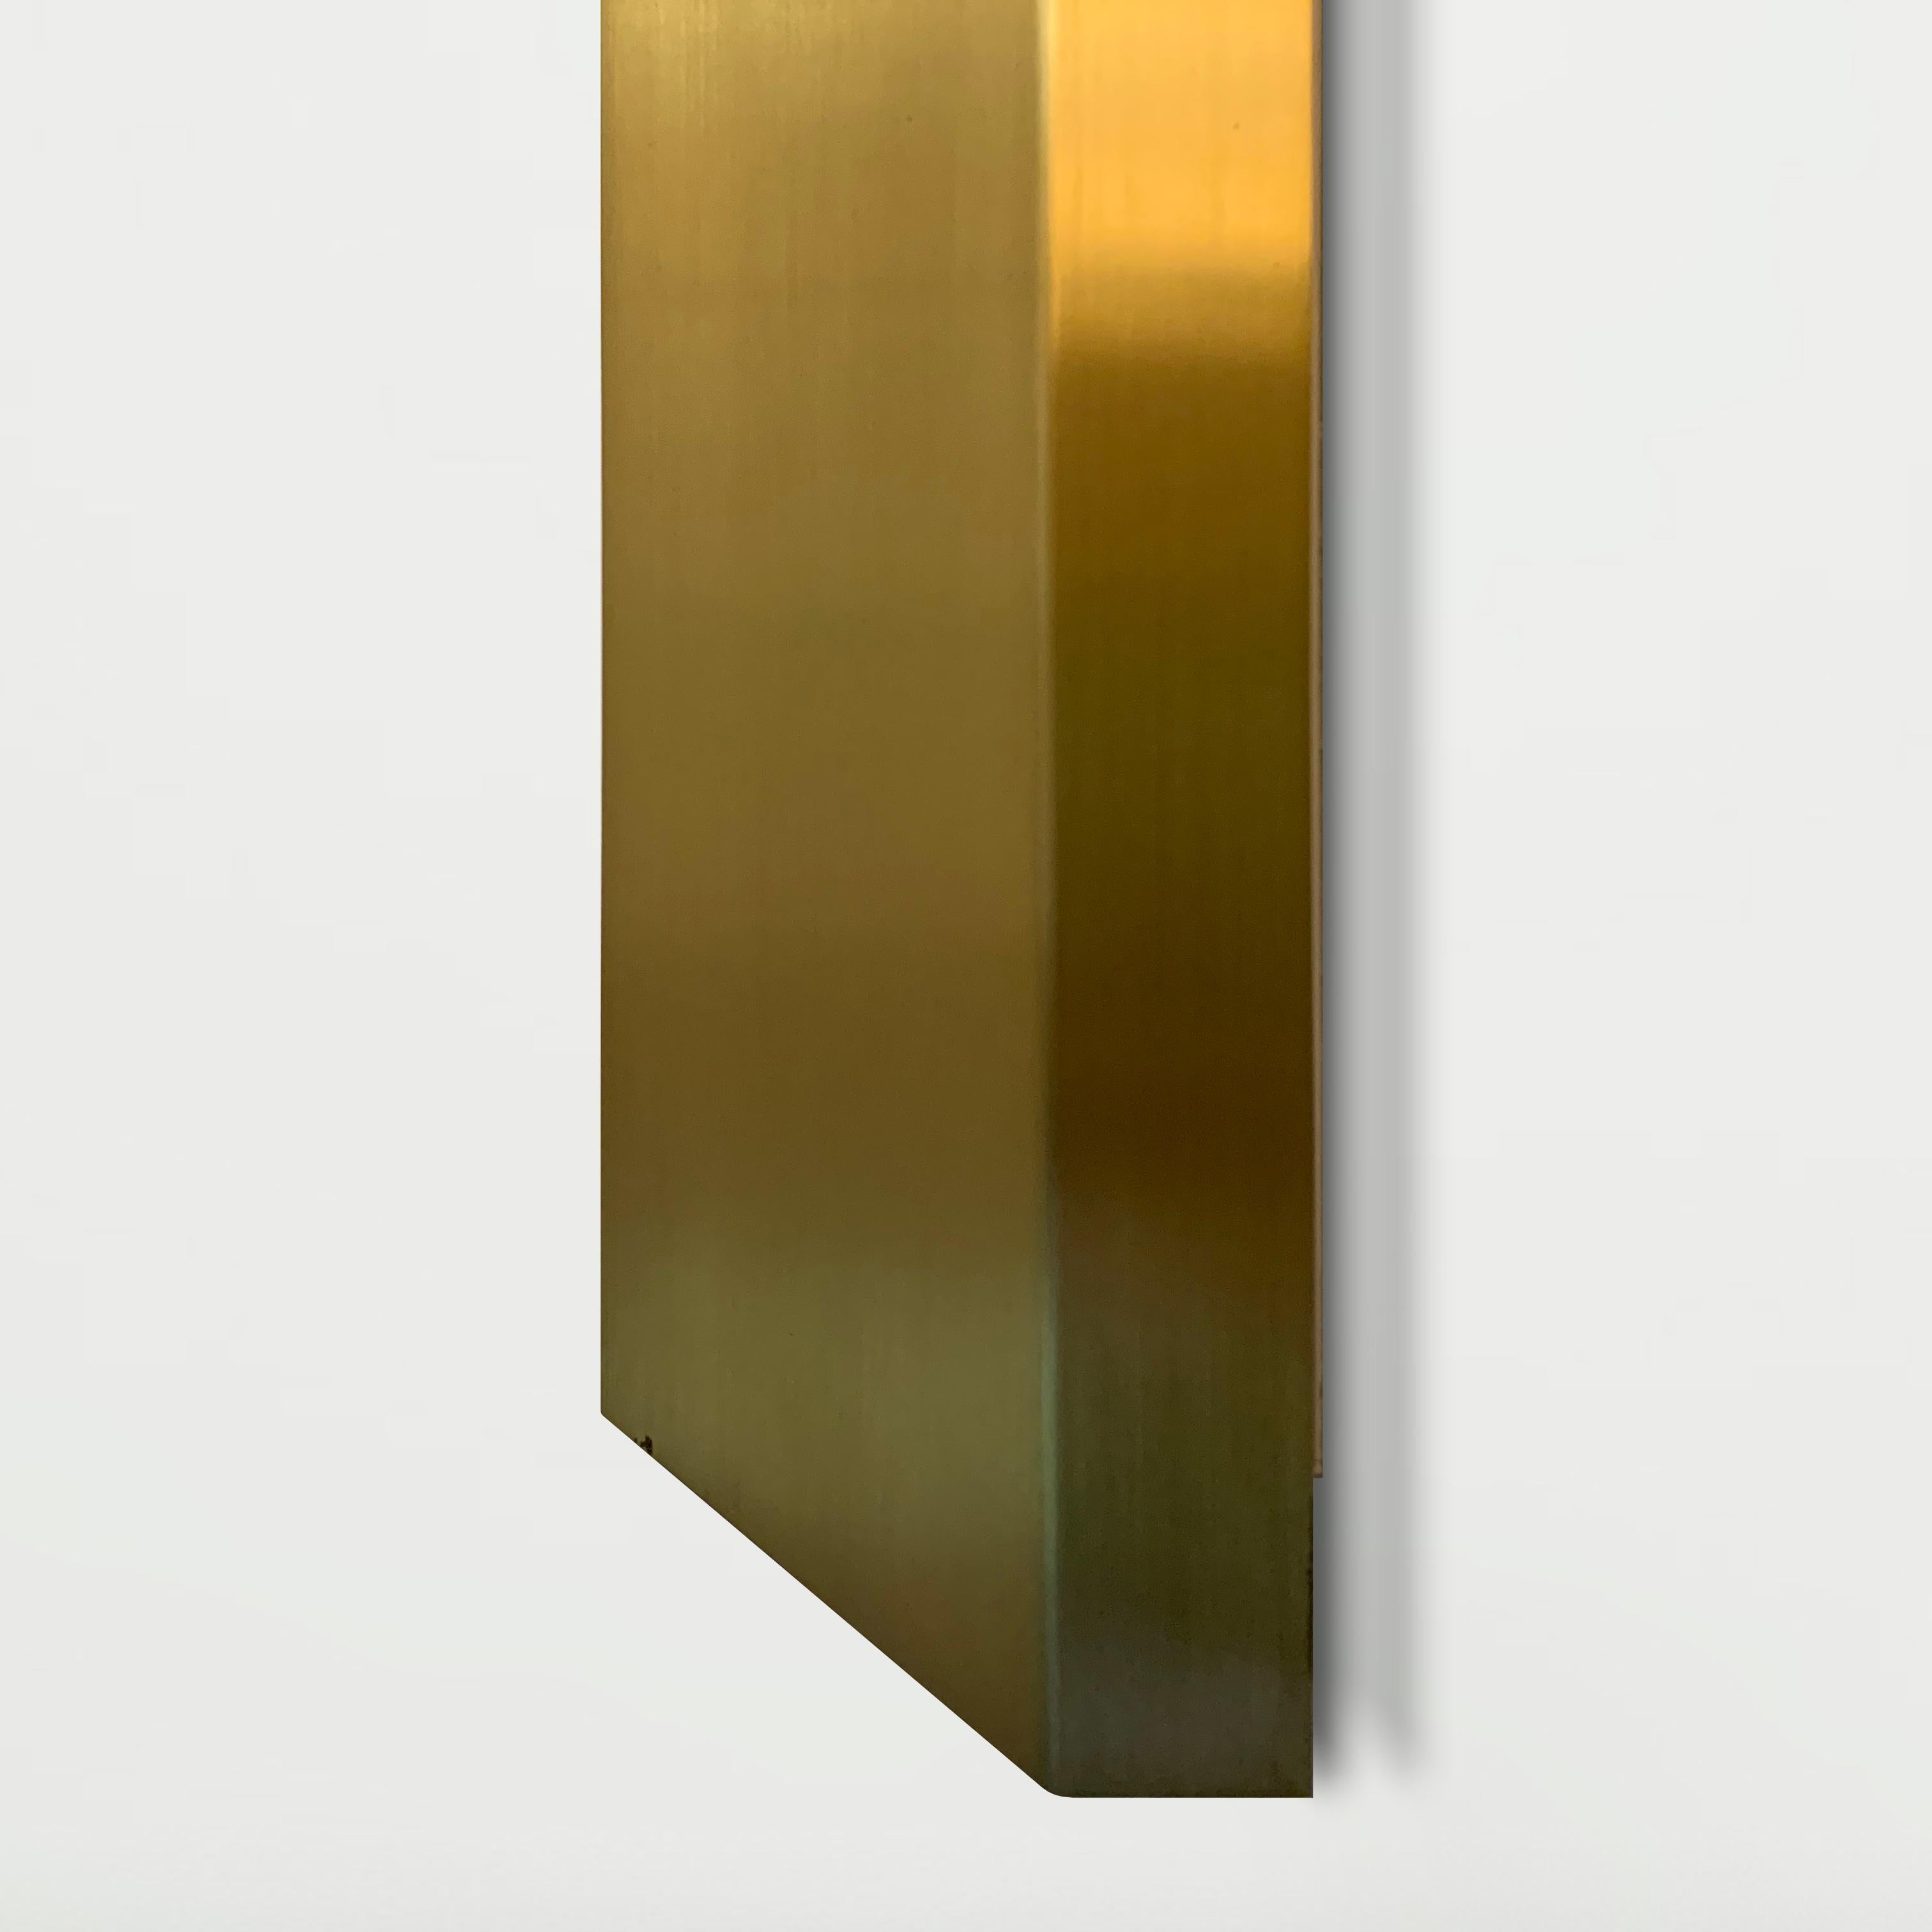 Bi-emission LED wall lamp with extruded aluminum lamp body and brushed brass exterior finish. Customizable with ceramic elements as an exterior finish. Indirect light fixture. Possibility of emergency module. Drivers and accessories for wall